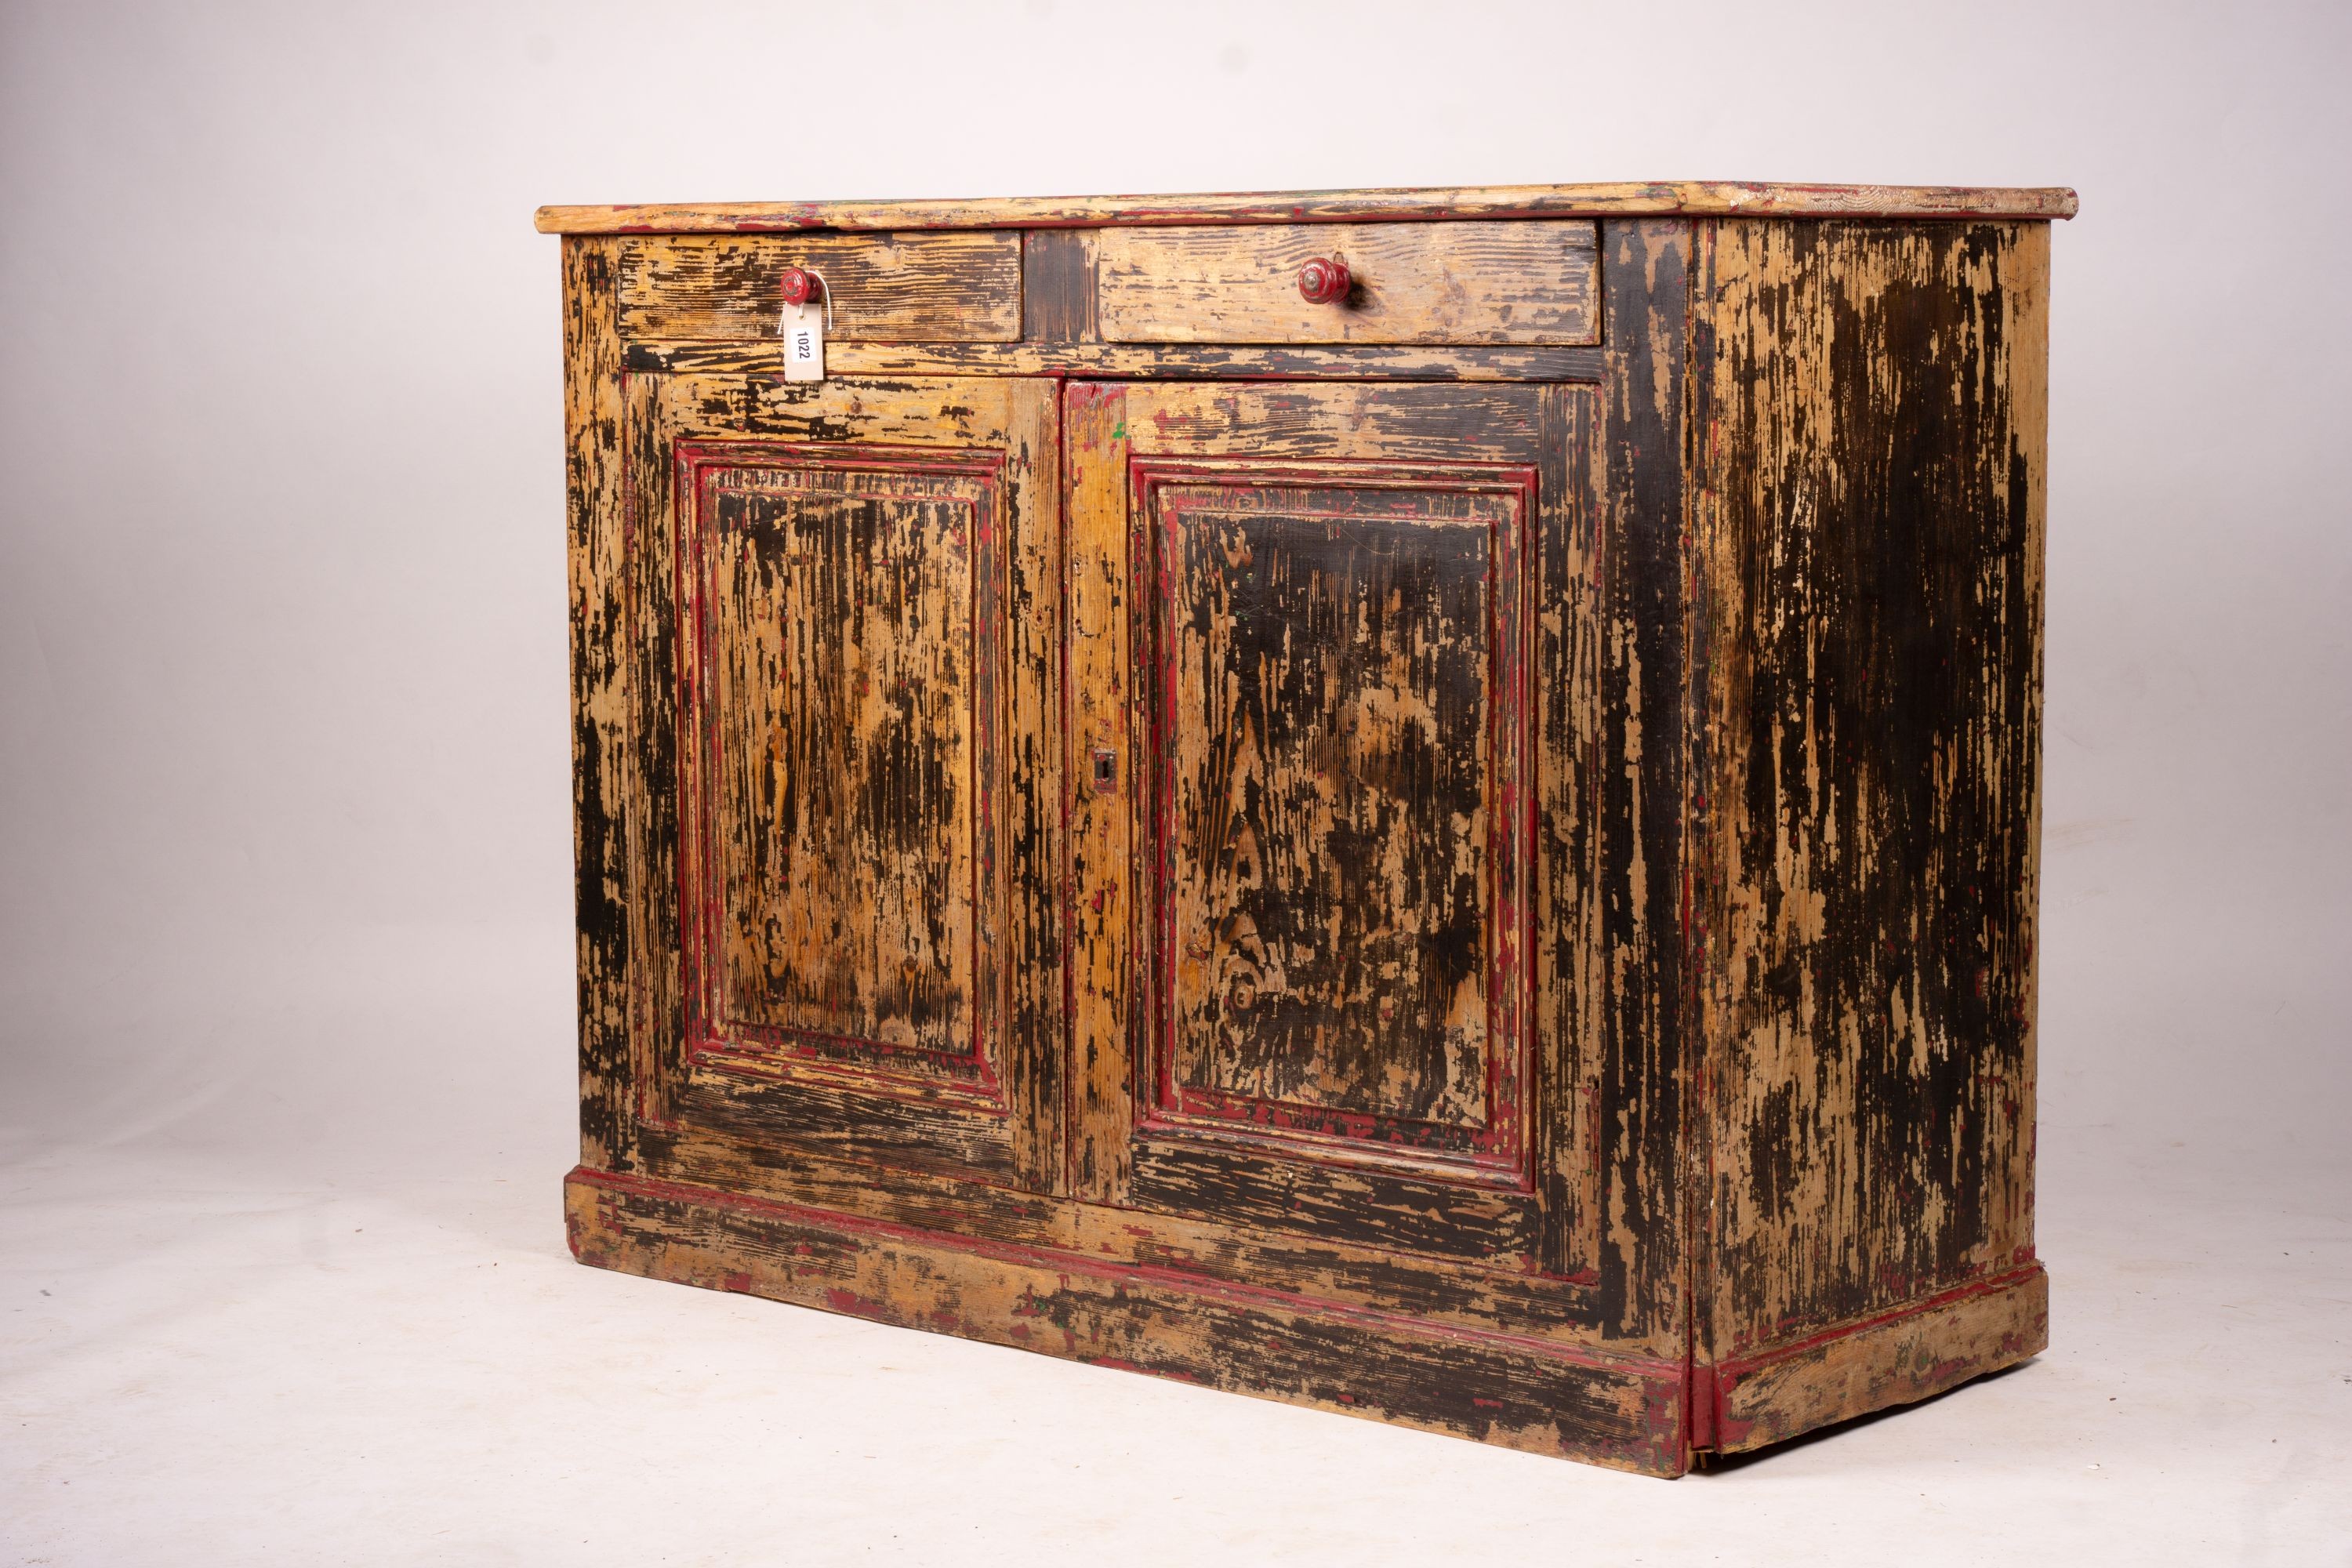 A 19th century French painted pine two door cabinet with scraped finish, width 140cm, depth 57cm, height 105cm